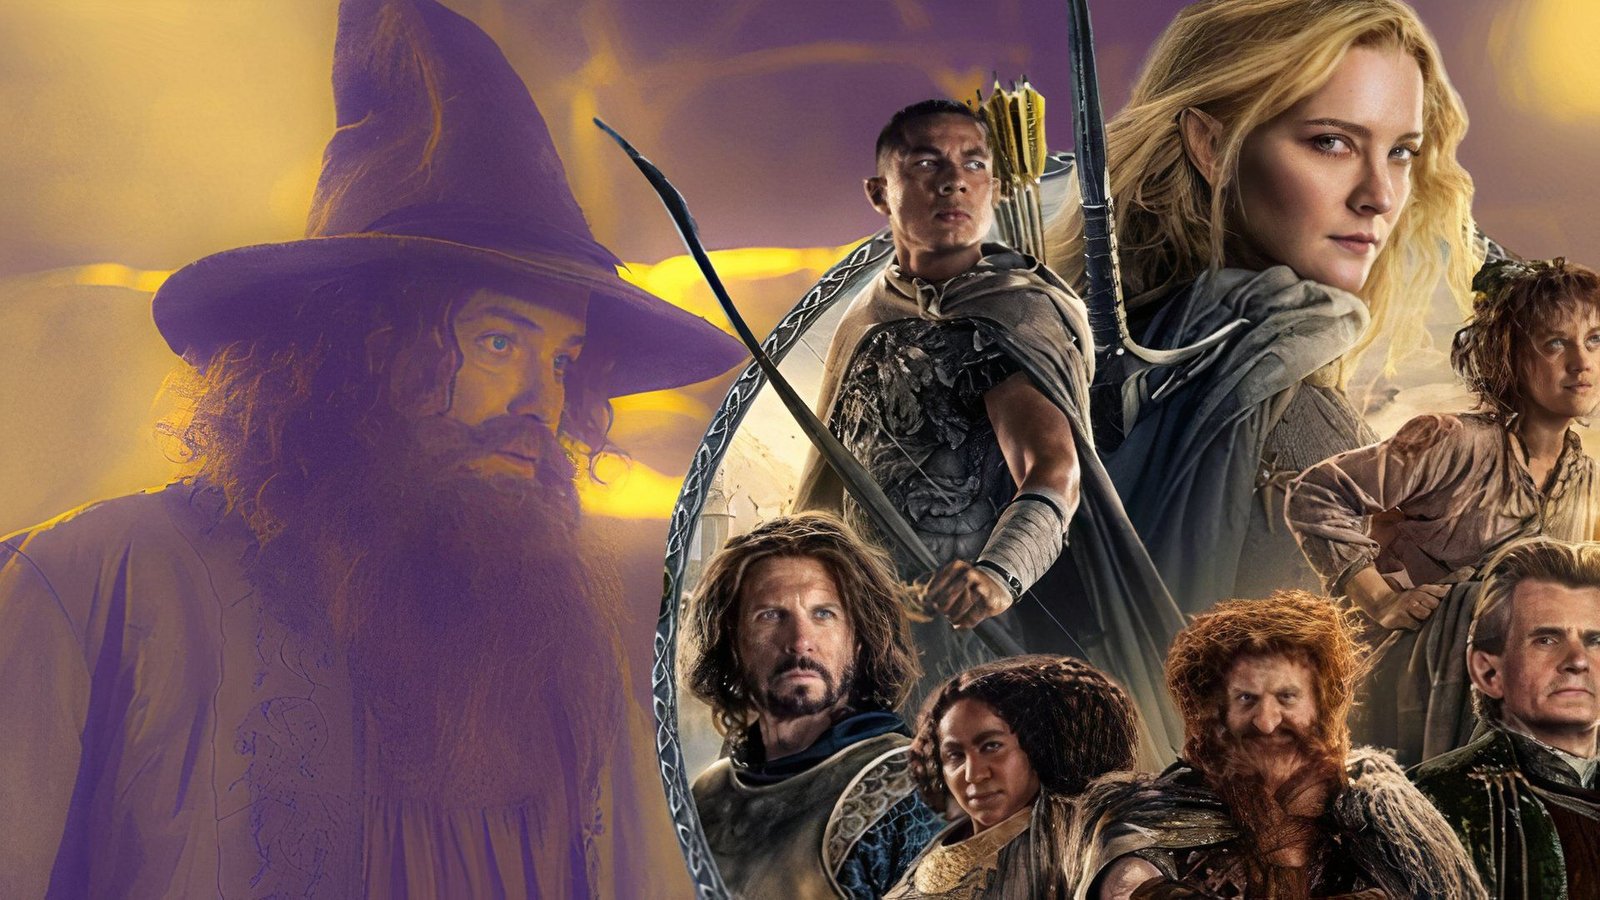 Rings of Power Season 2 Images Reveal Live-Action Tom Bombadil